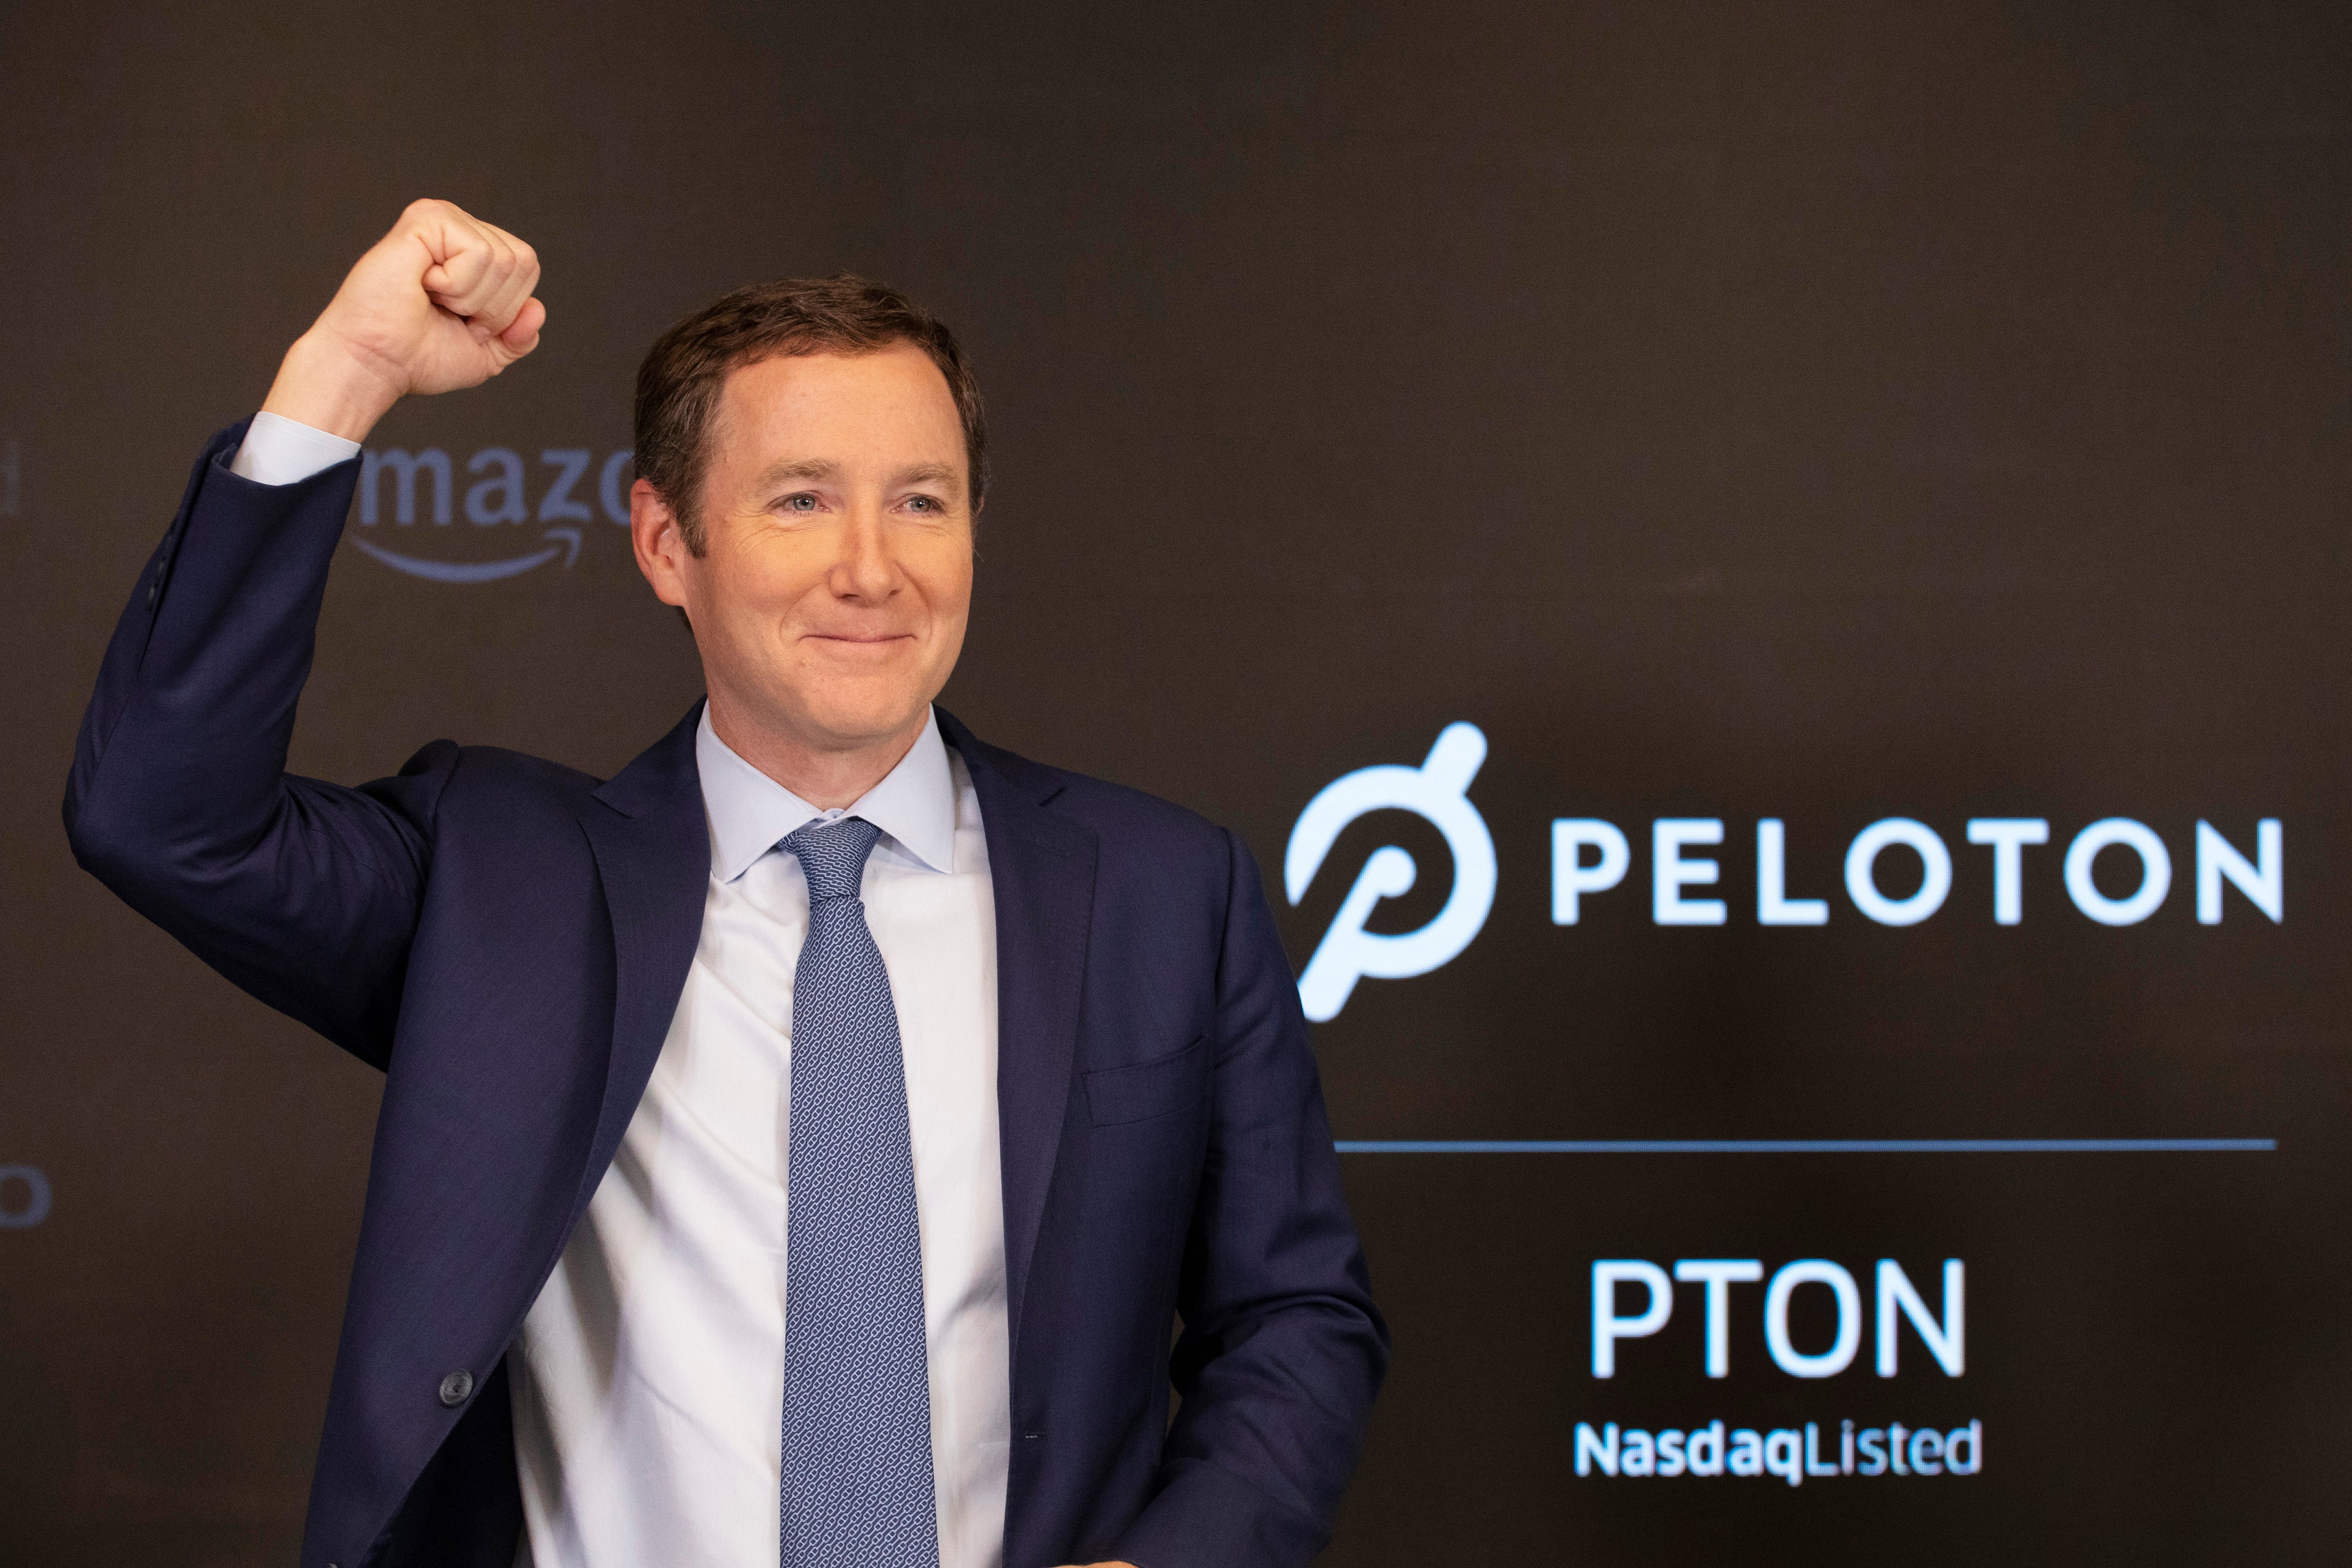 File photo: John Foley, who stepped down as Peloton CEO this week, will remain executive chairman of the board